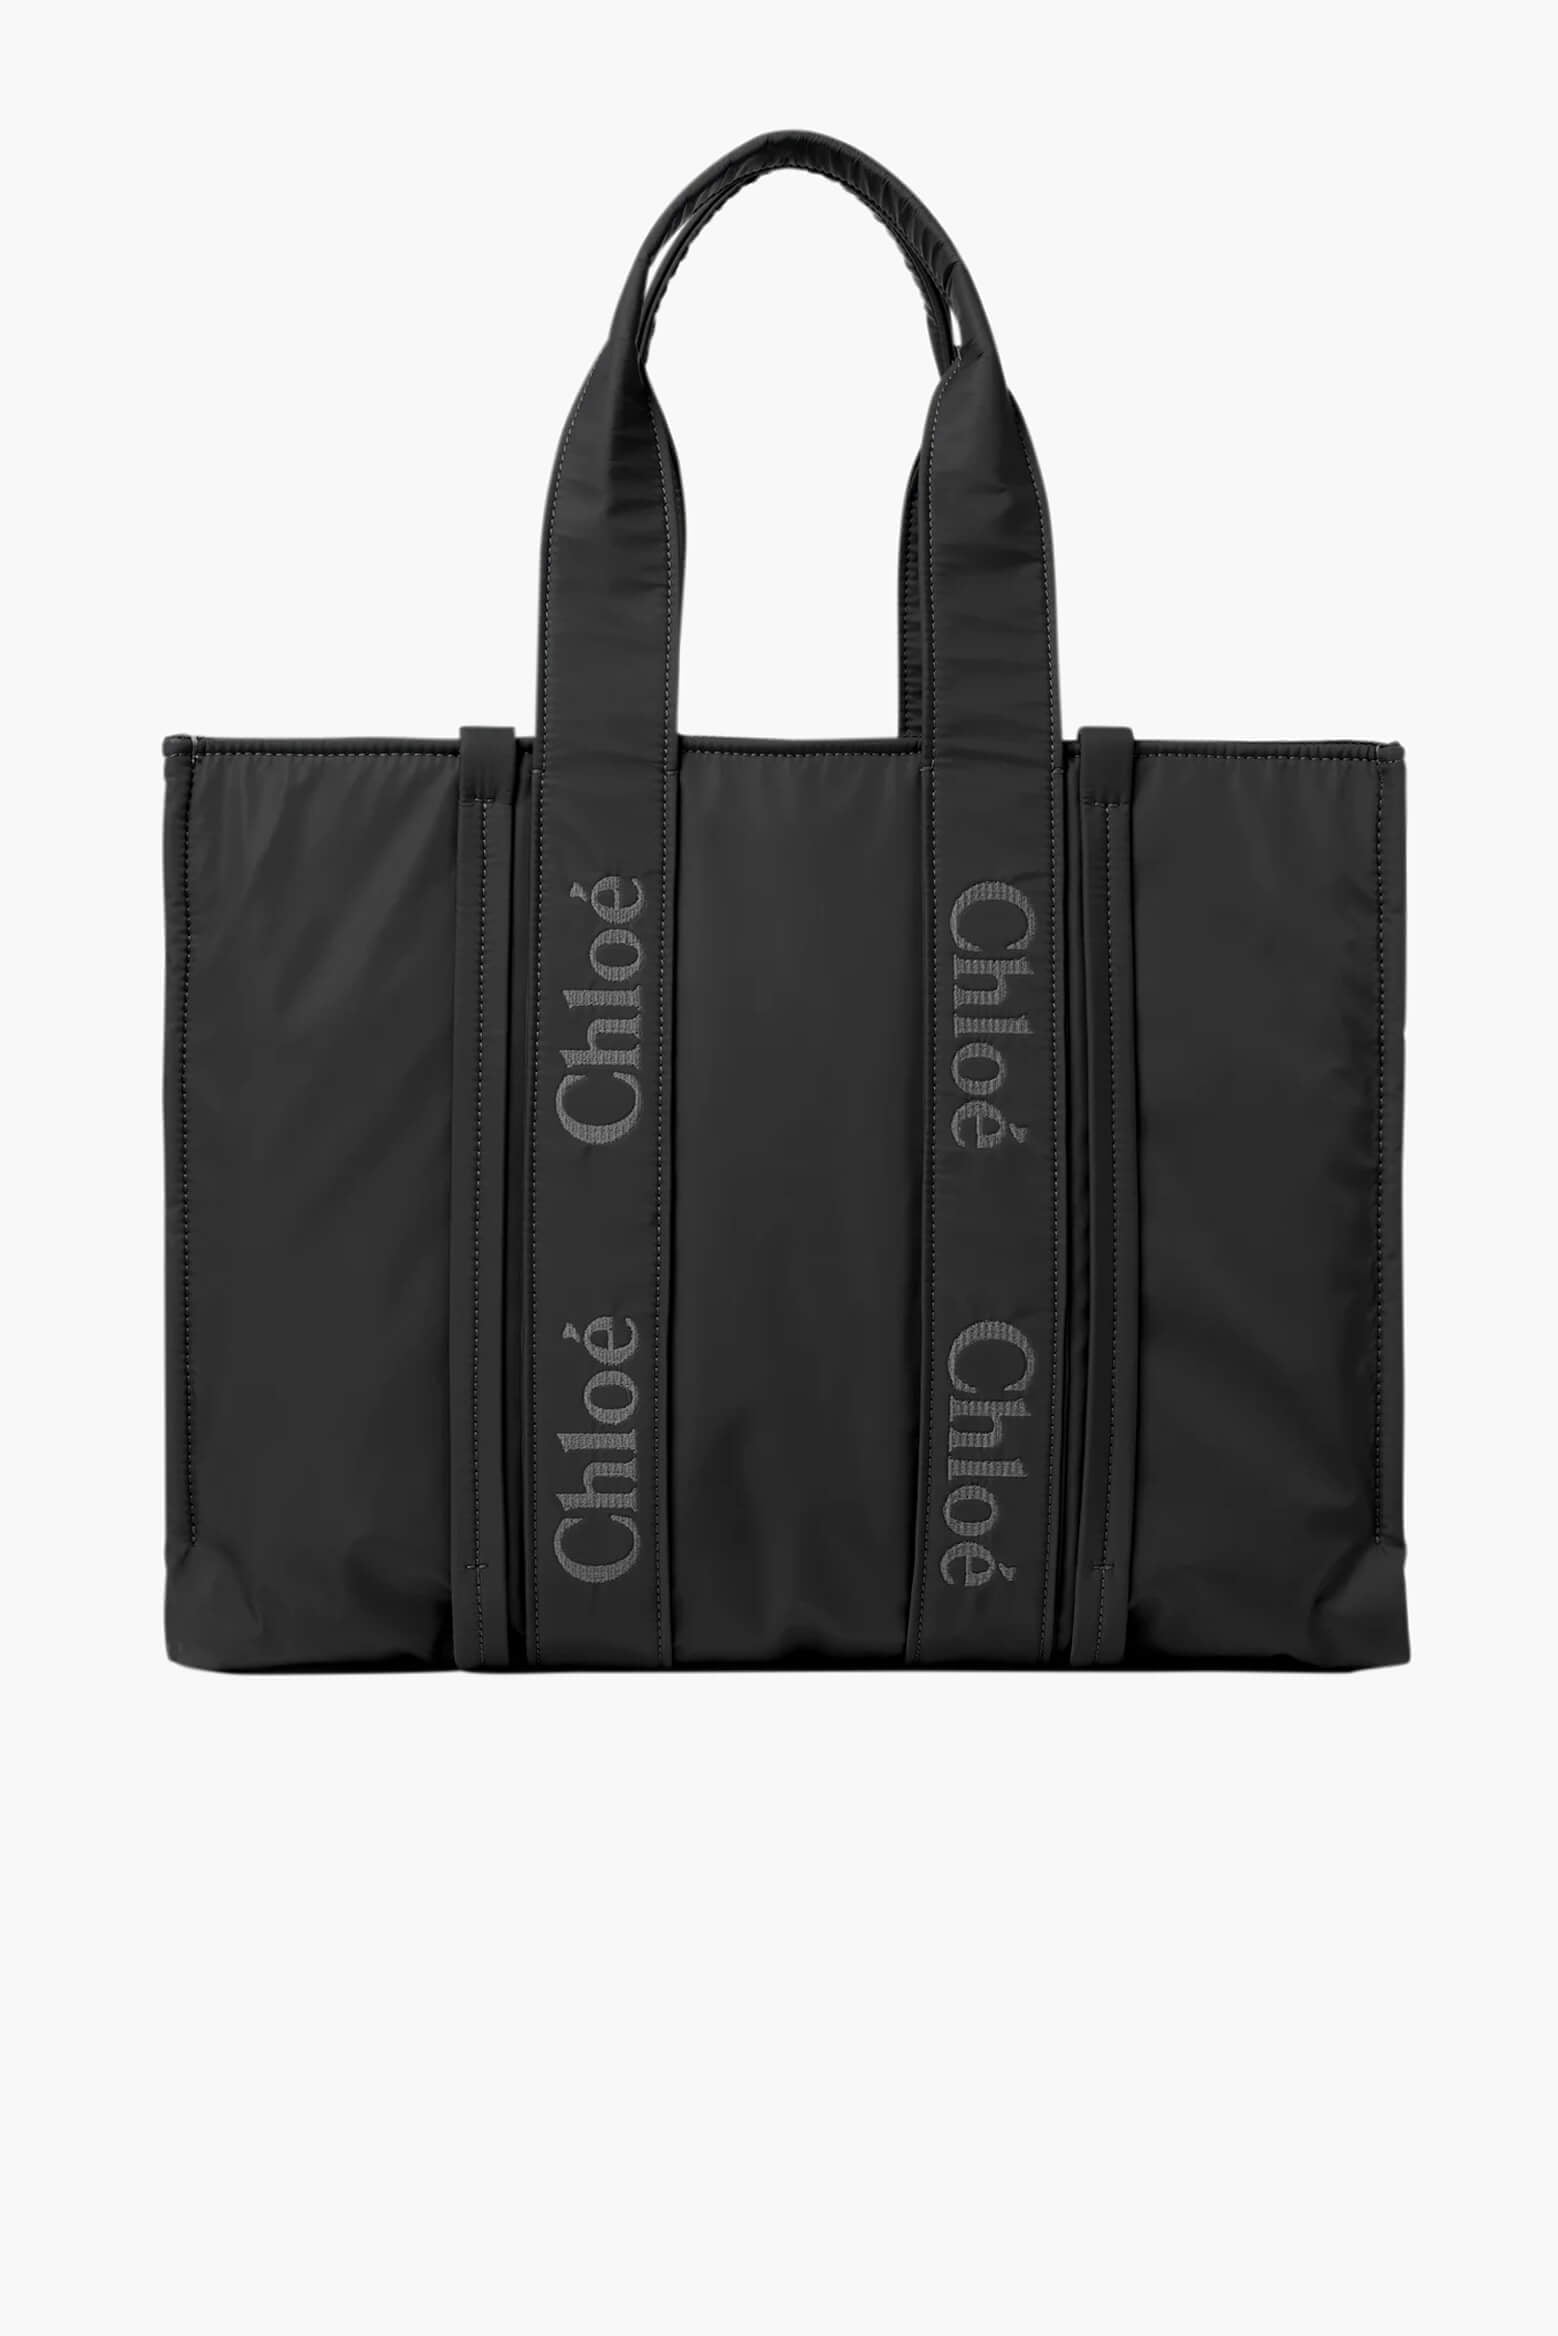 Chloé Woody Nylon Tote in Black available at The New Trend Australia.